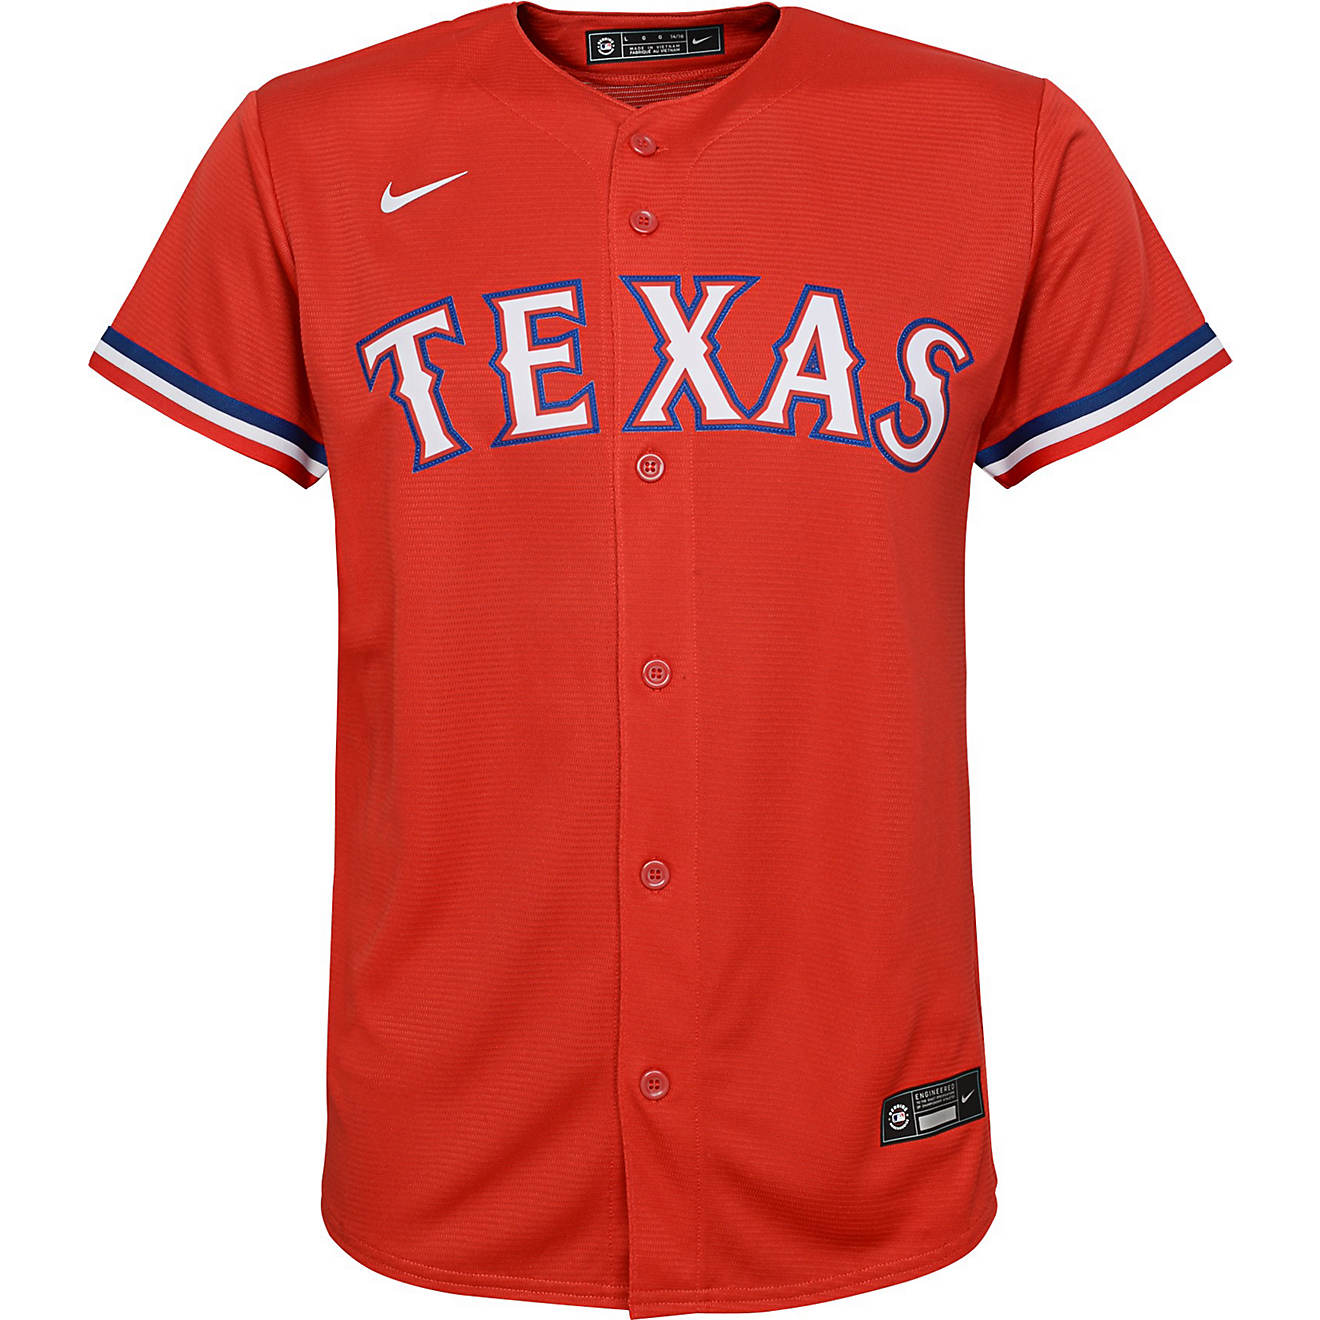 Nike Youth Texas Rangers Team Replica Finished Jersey | Academy